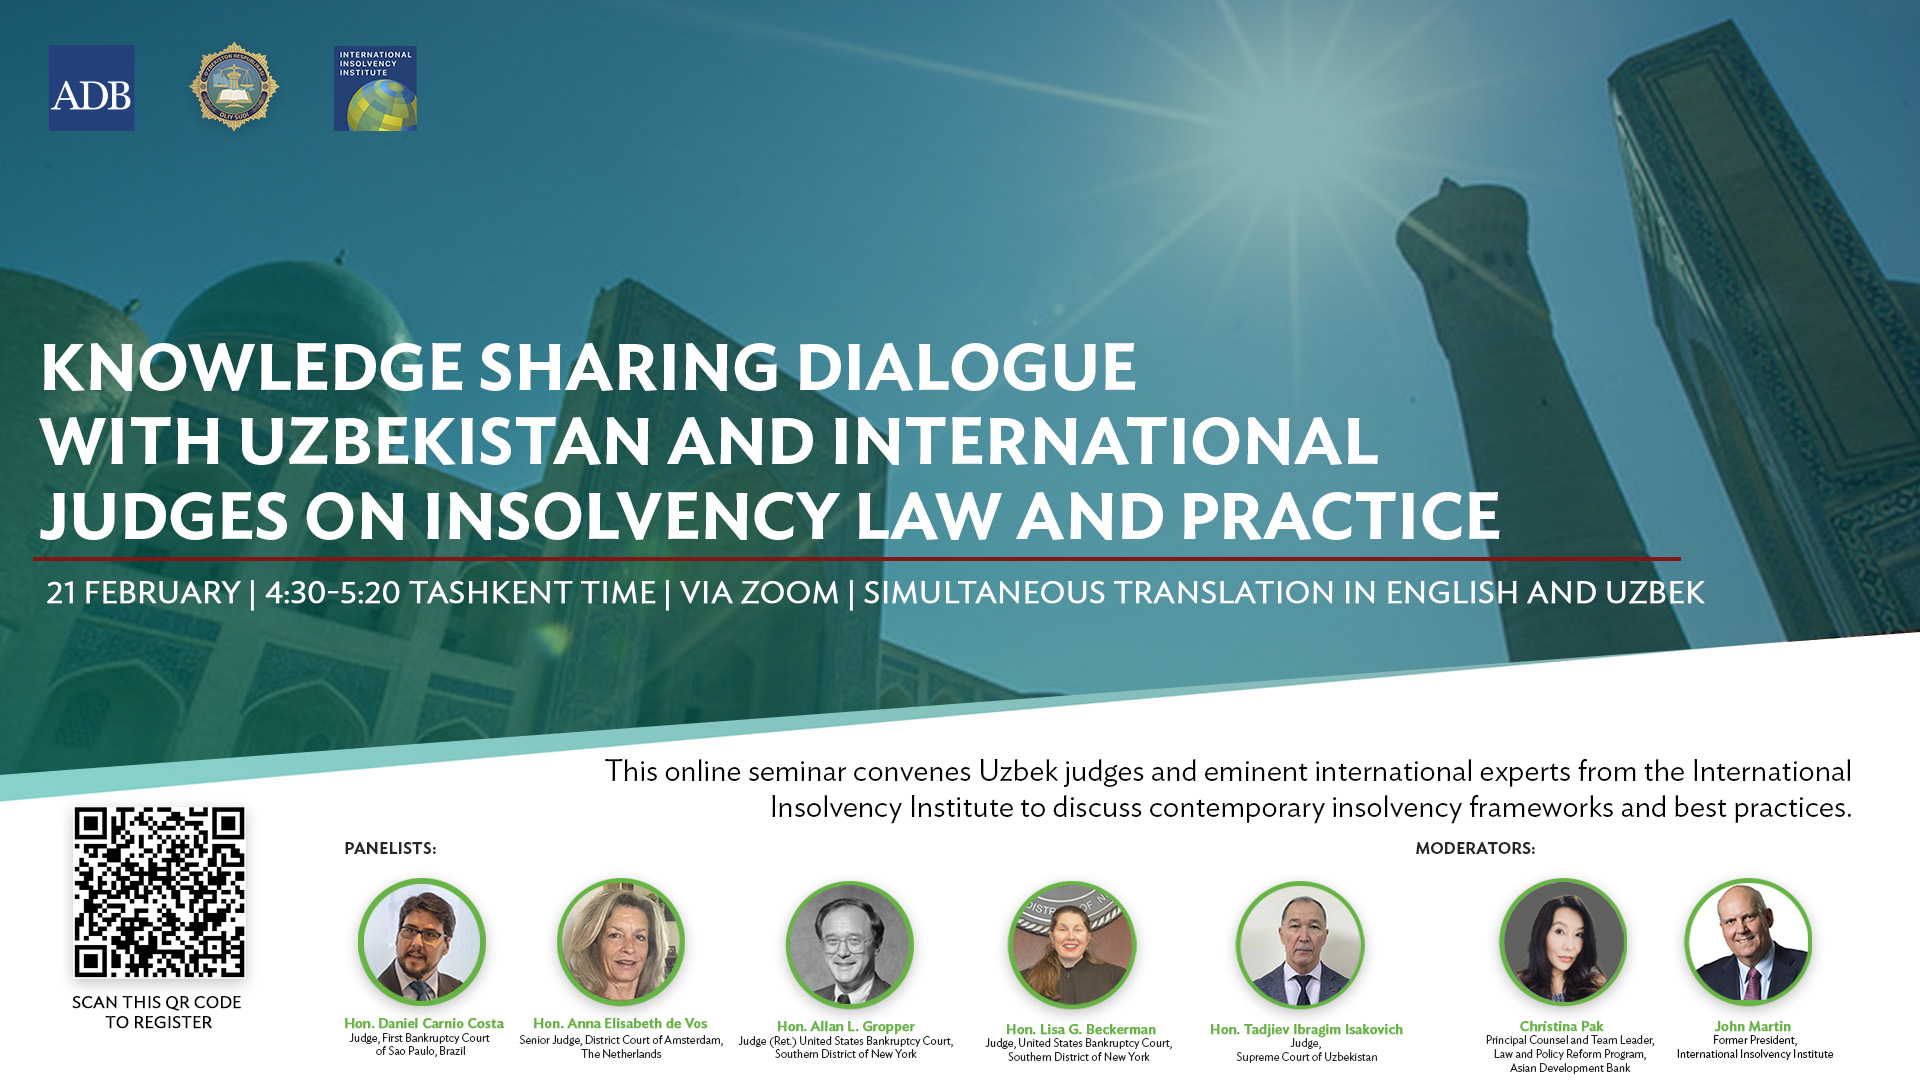 Knowledge Sharing Dialogue with Uzbekistan and International Judges on Insolvency Law and Practice